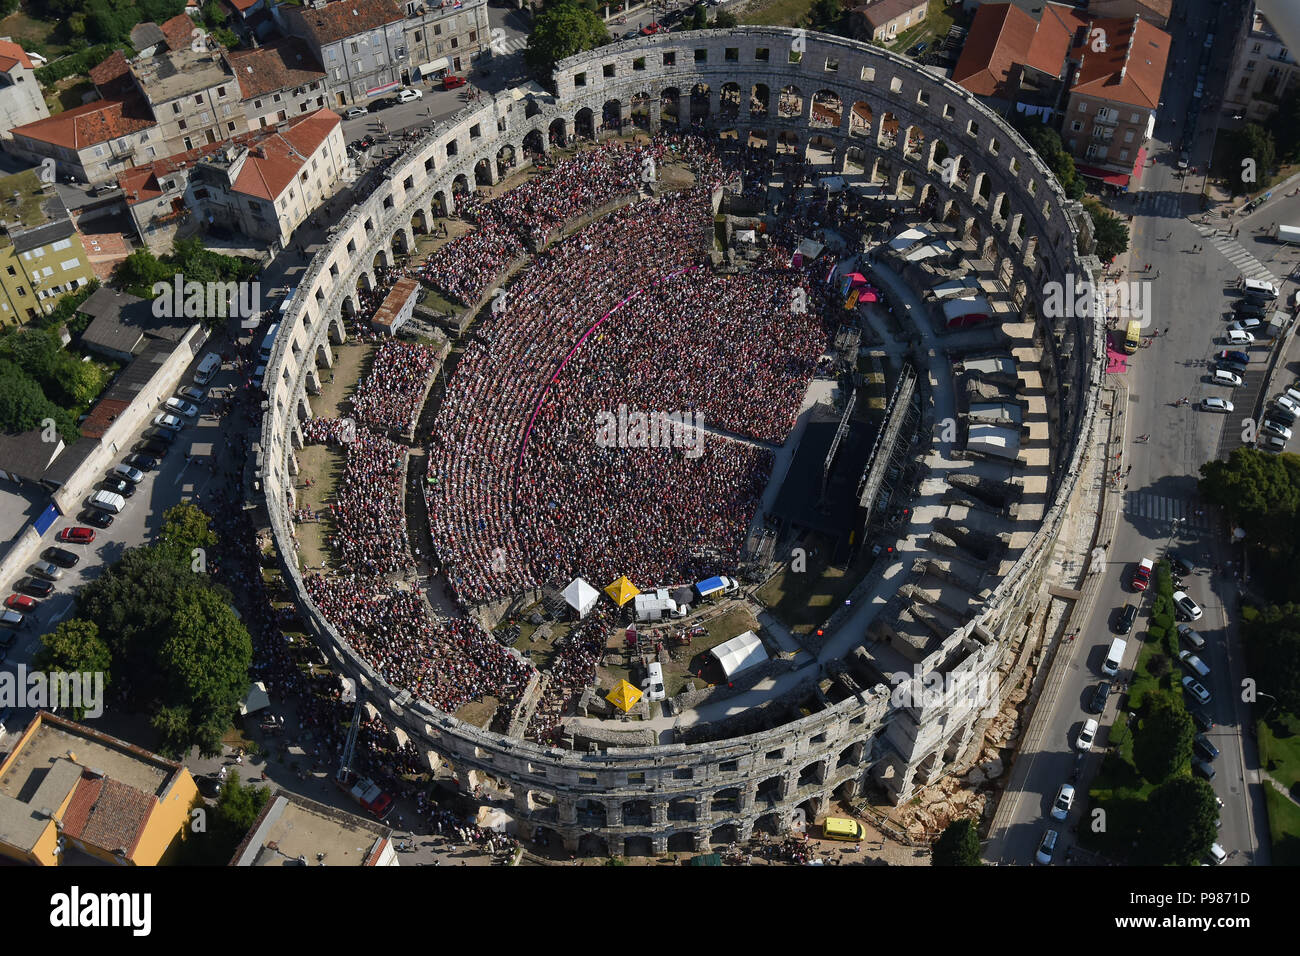 Pula. 15th July, 2018. Aerial photo taken on July 15, 2018 shows fans of Croatia watching the 2018 FIFA World Cup final match between Croatia and France at the ancient arena in Pula, Croatia. Croatia lost to France 2-4 and took the second place in World Cup. Credit: Dusko Marusic/Xinhua/Alamy Live News Stock Photo